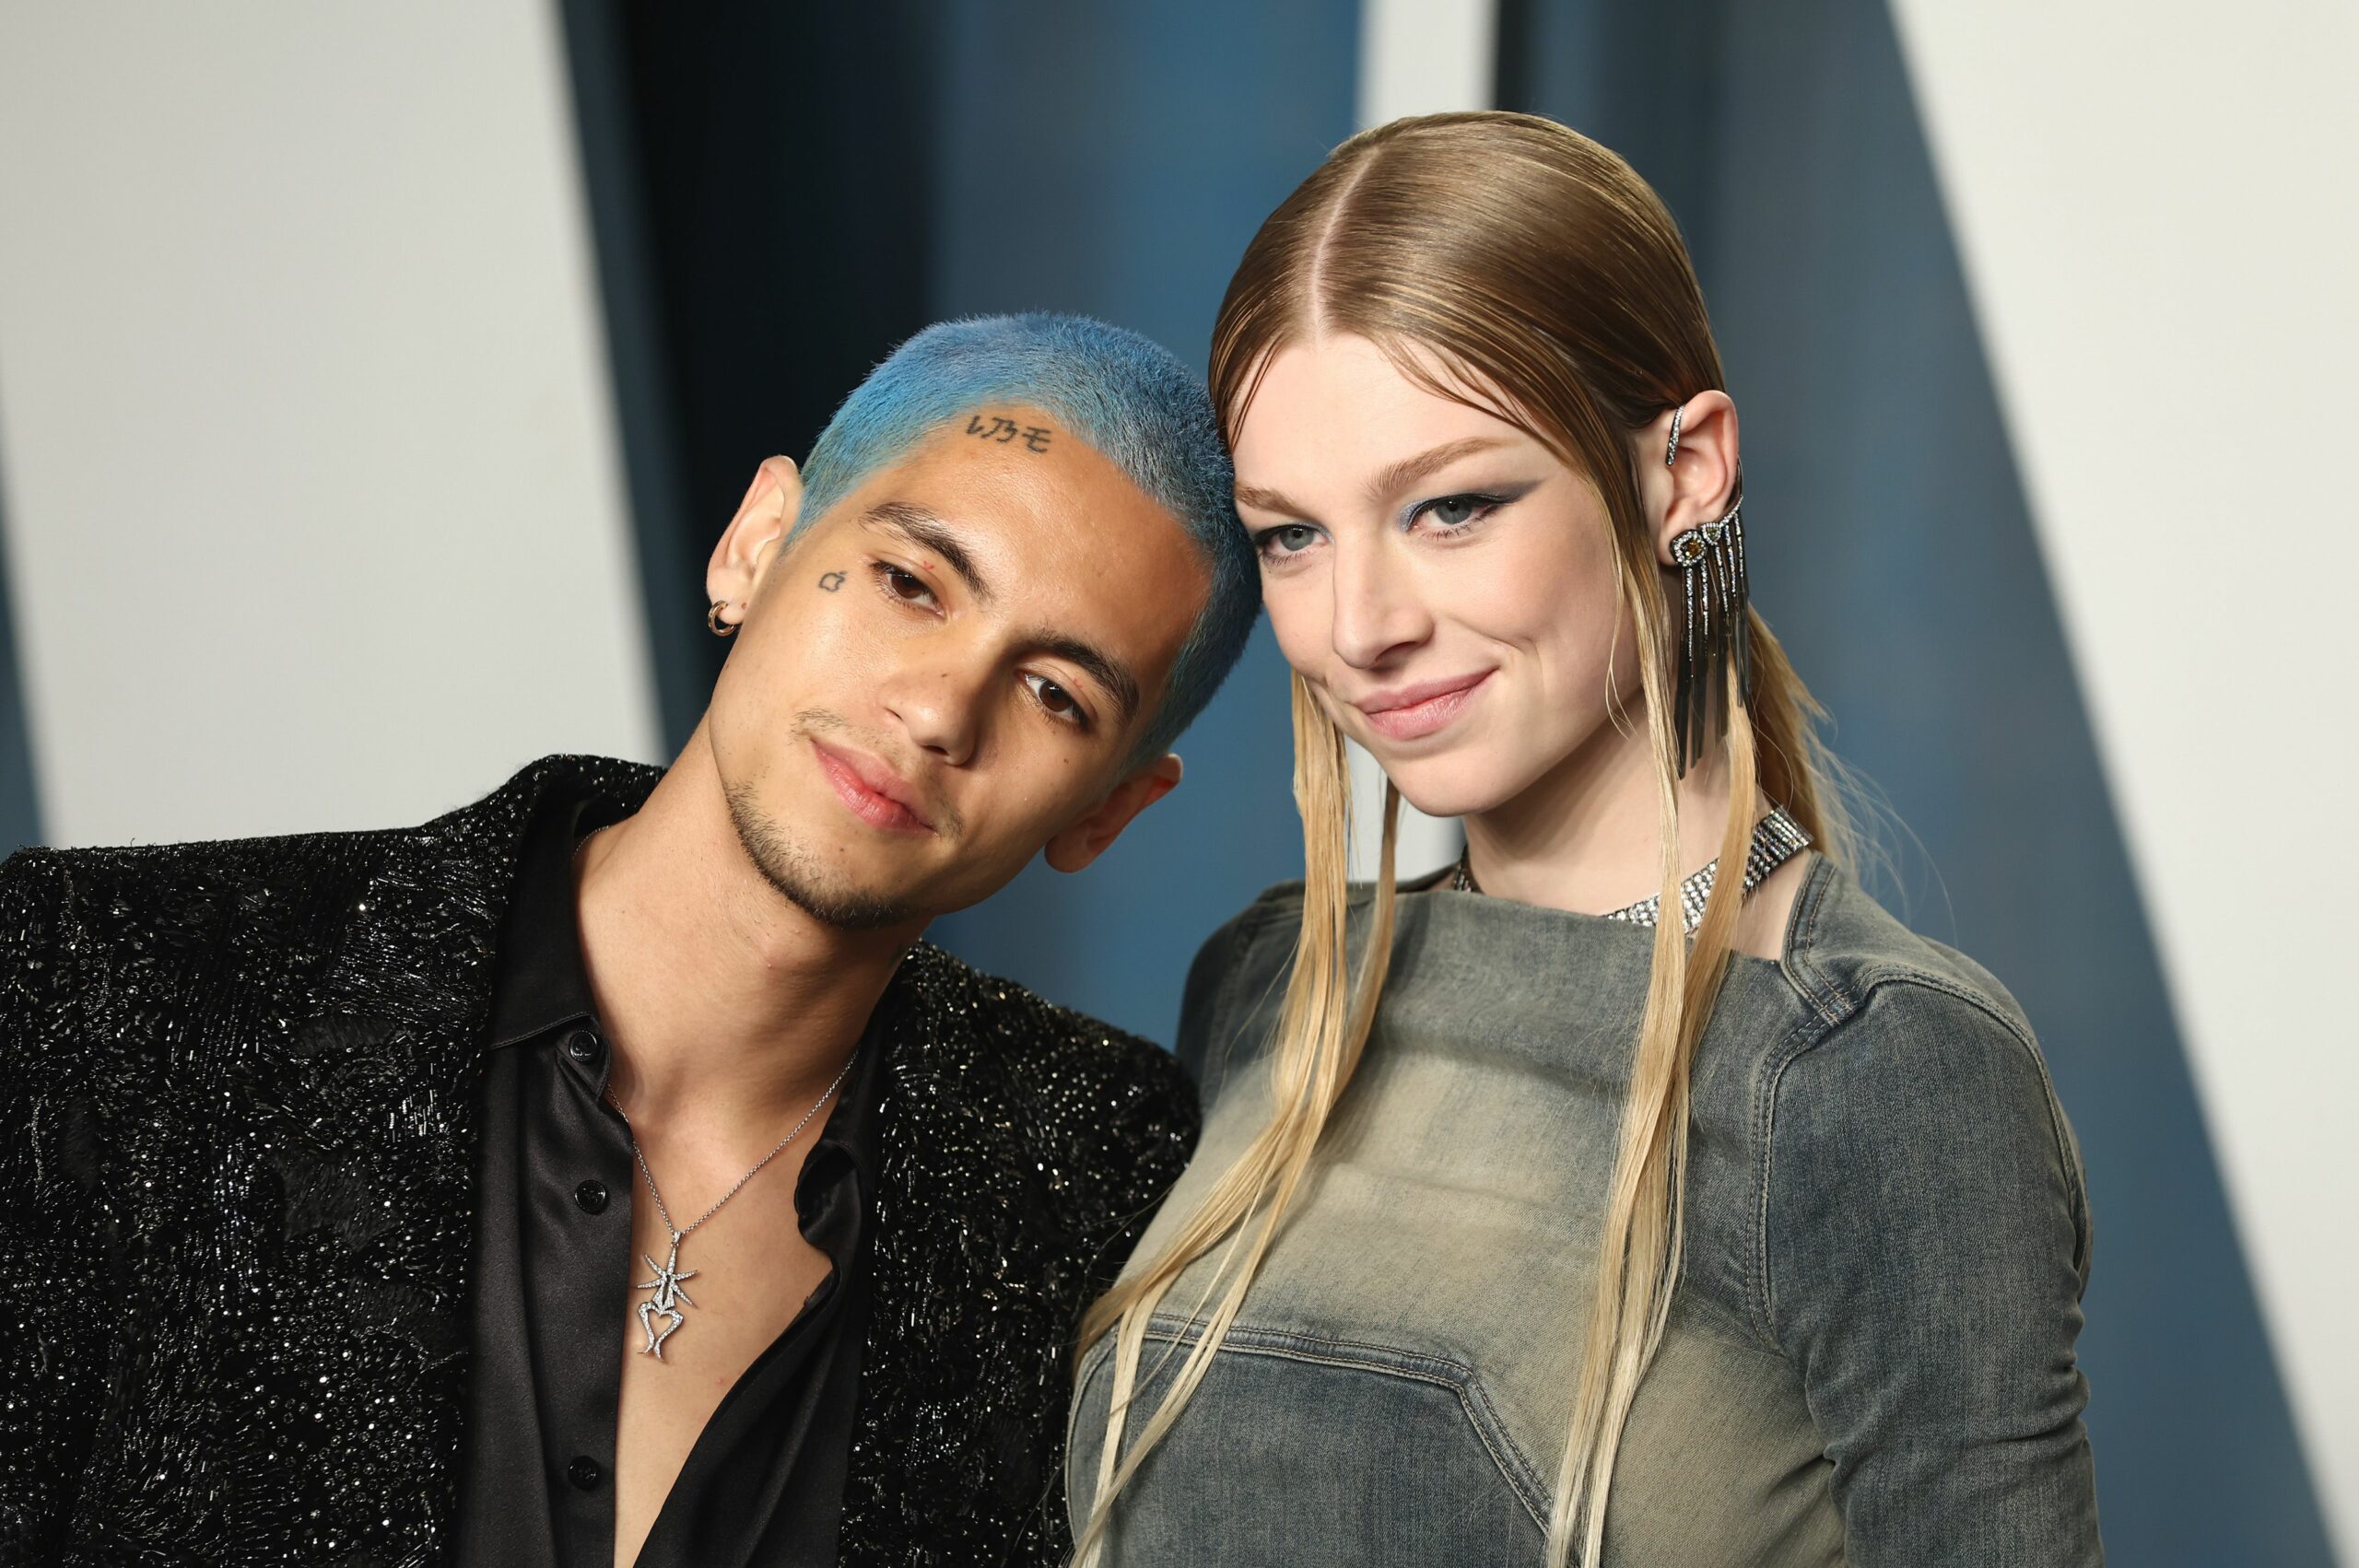 Dominic fike and hunter schafer